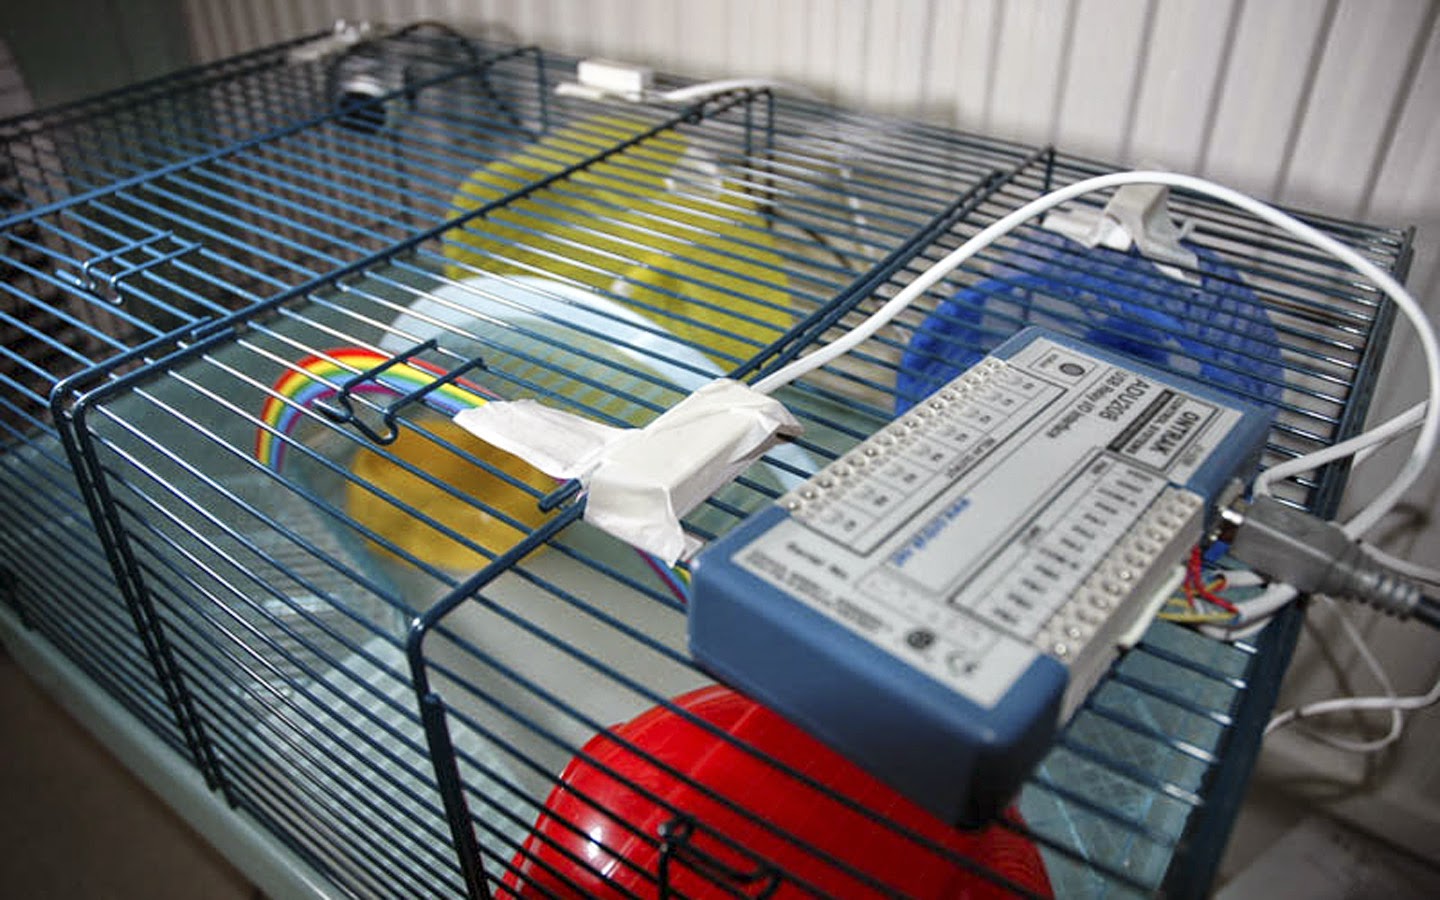 The image displays a blue hamster cage with an electronic device on top, likely used for data collection or environmental control within the cage. This technologically advanced setup combines pet care elements with sophisticated equipment, suggesting it may serve research, monitoring, or interactive purposes beyond typical pet-keeping.